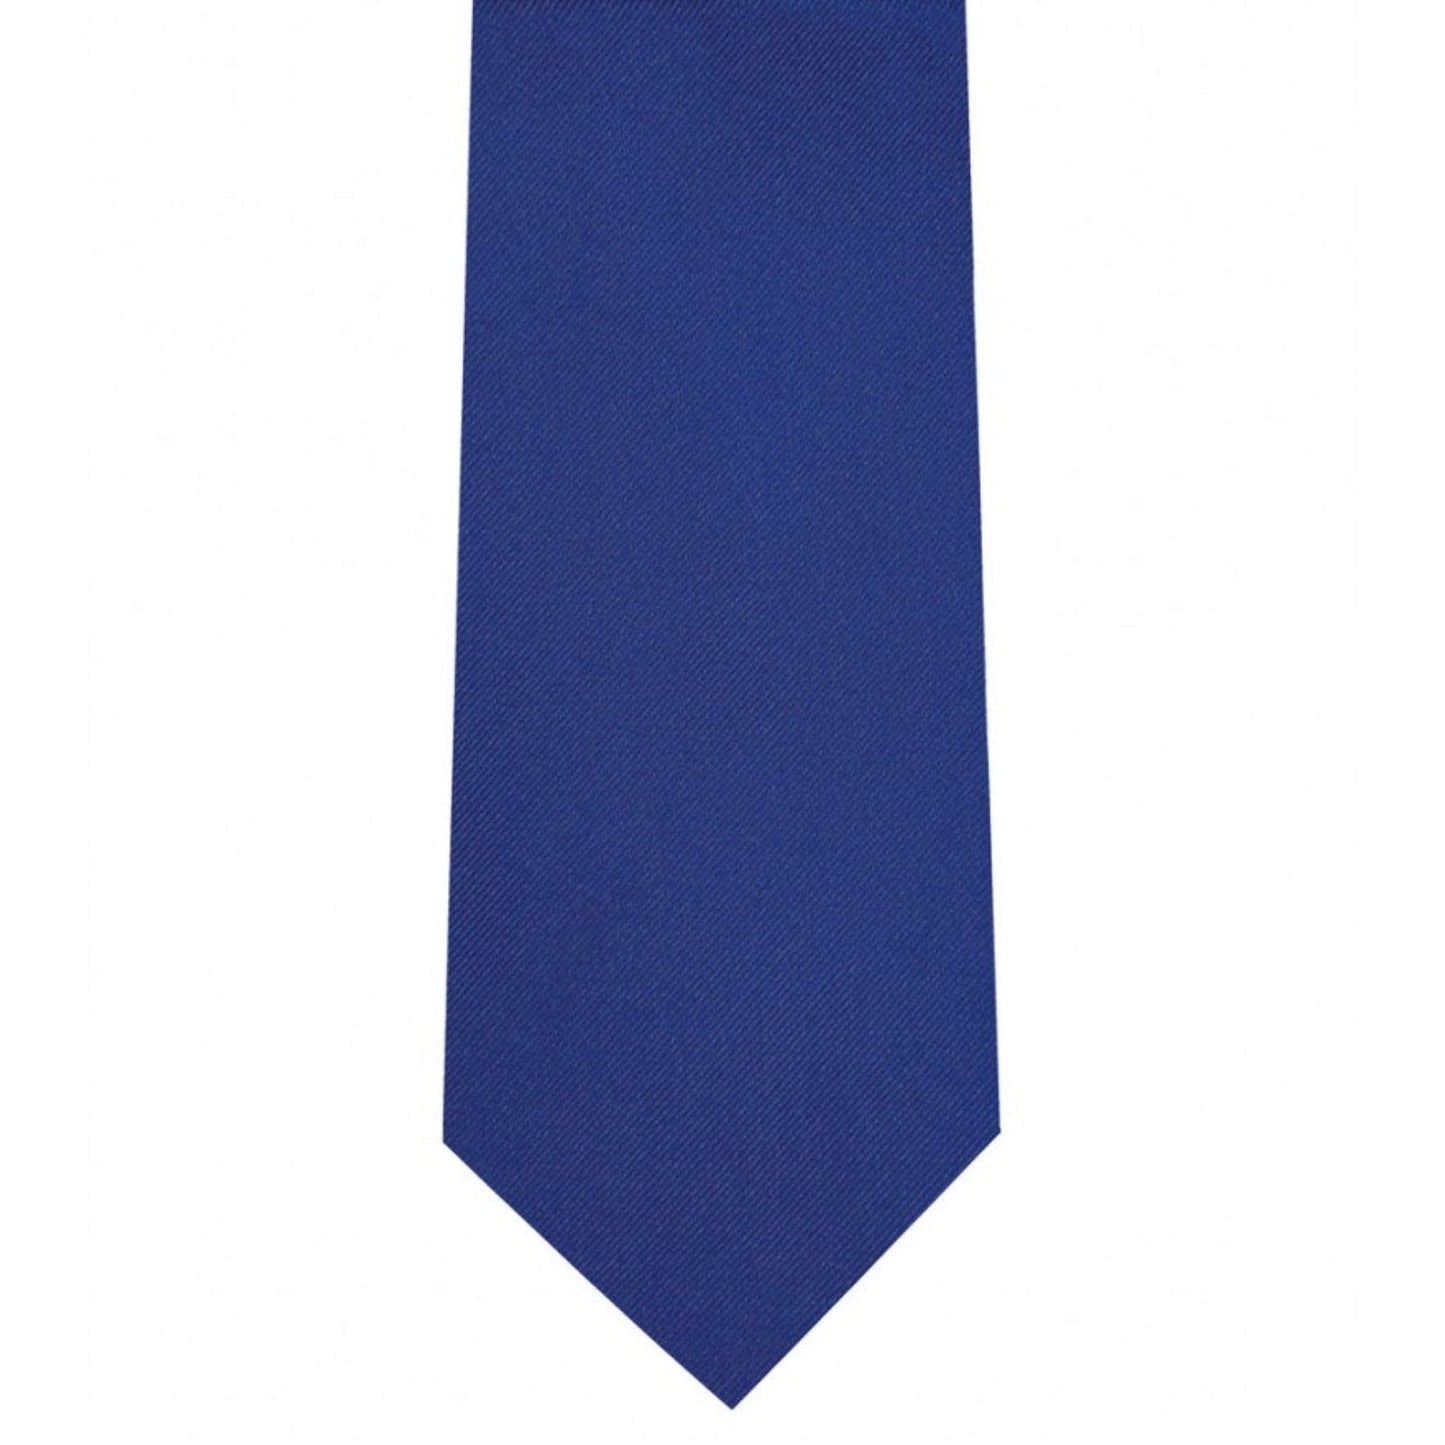 Classic Cobalt Cobalt Tie Ultra Skinny tie width 2.25 inches With Matching Pocket Square | KCT Menswear